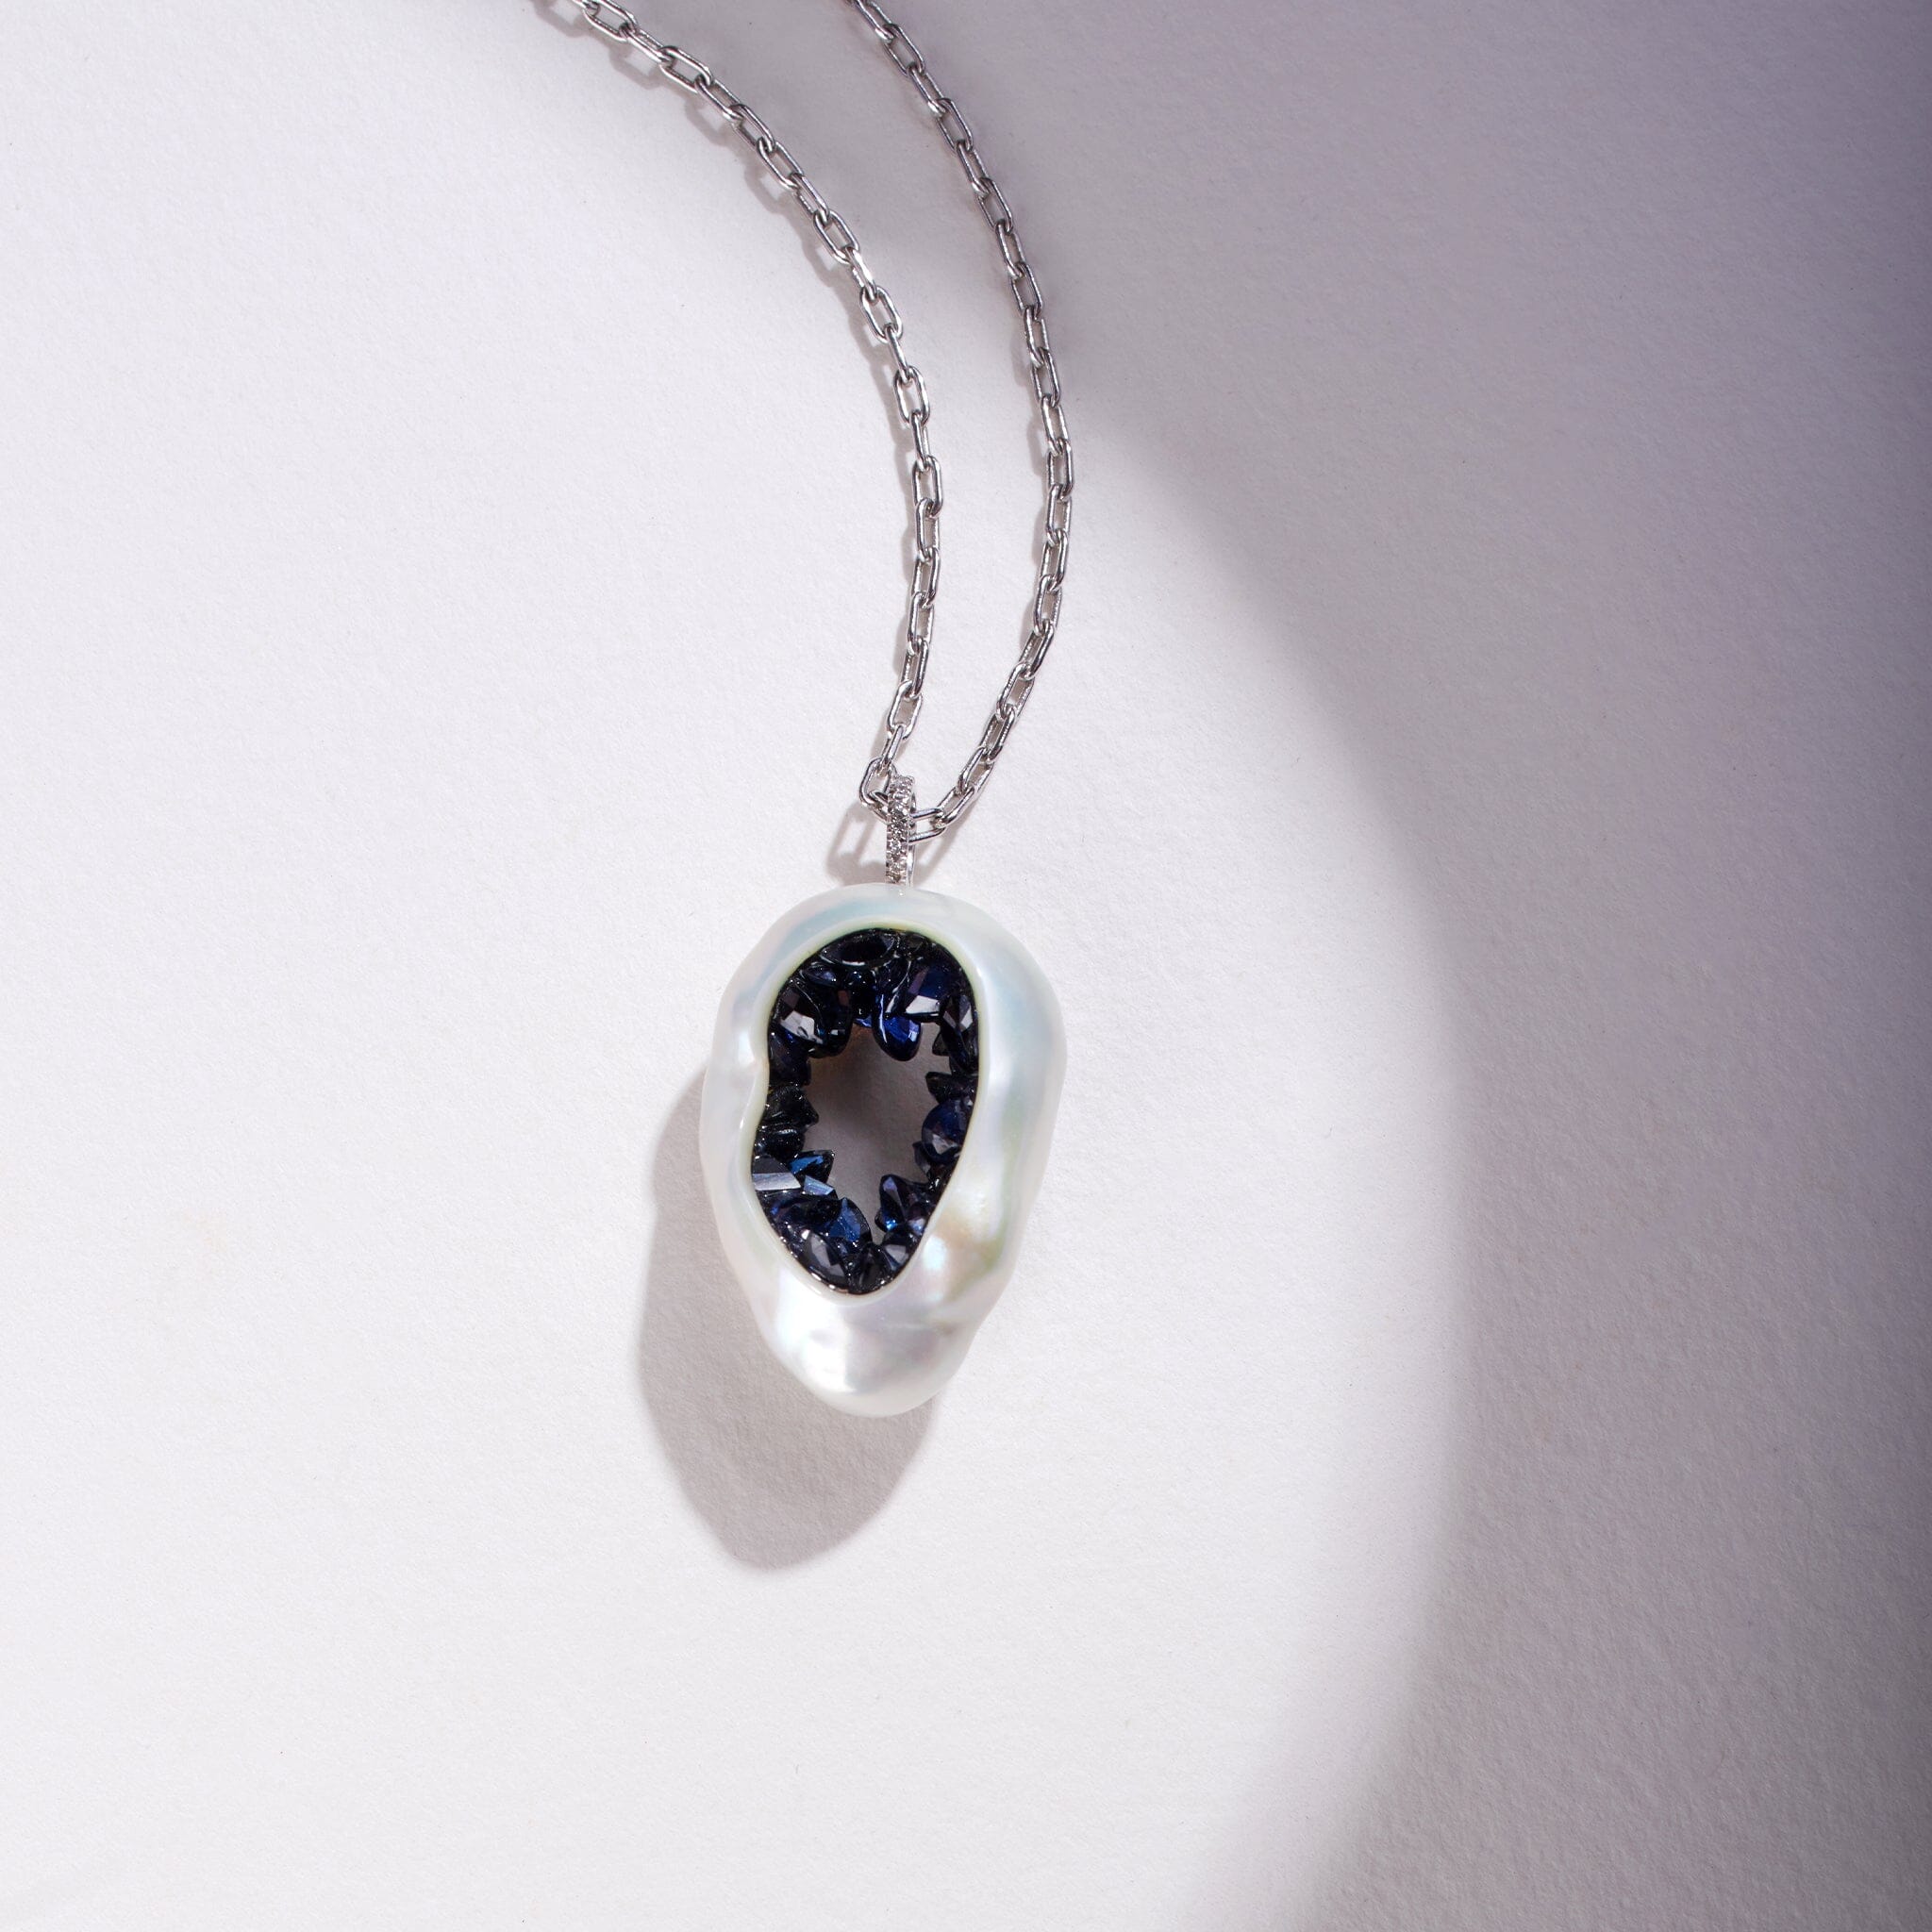 Freshwater Souffle Pearl Grotto Pendant with Blue Sapphires and Diamond Bail